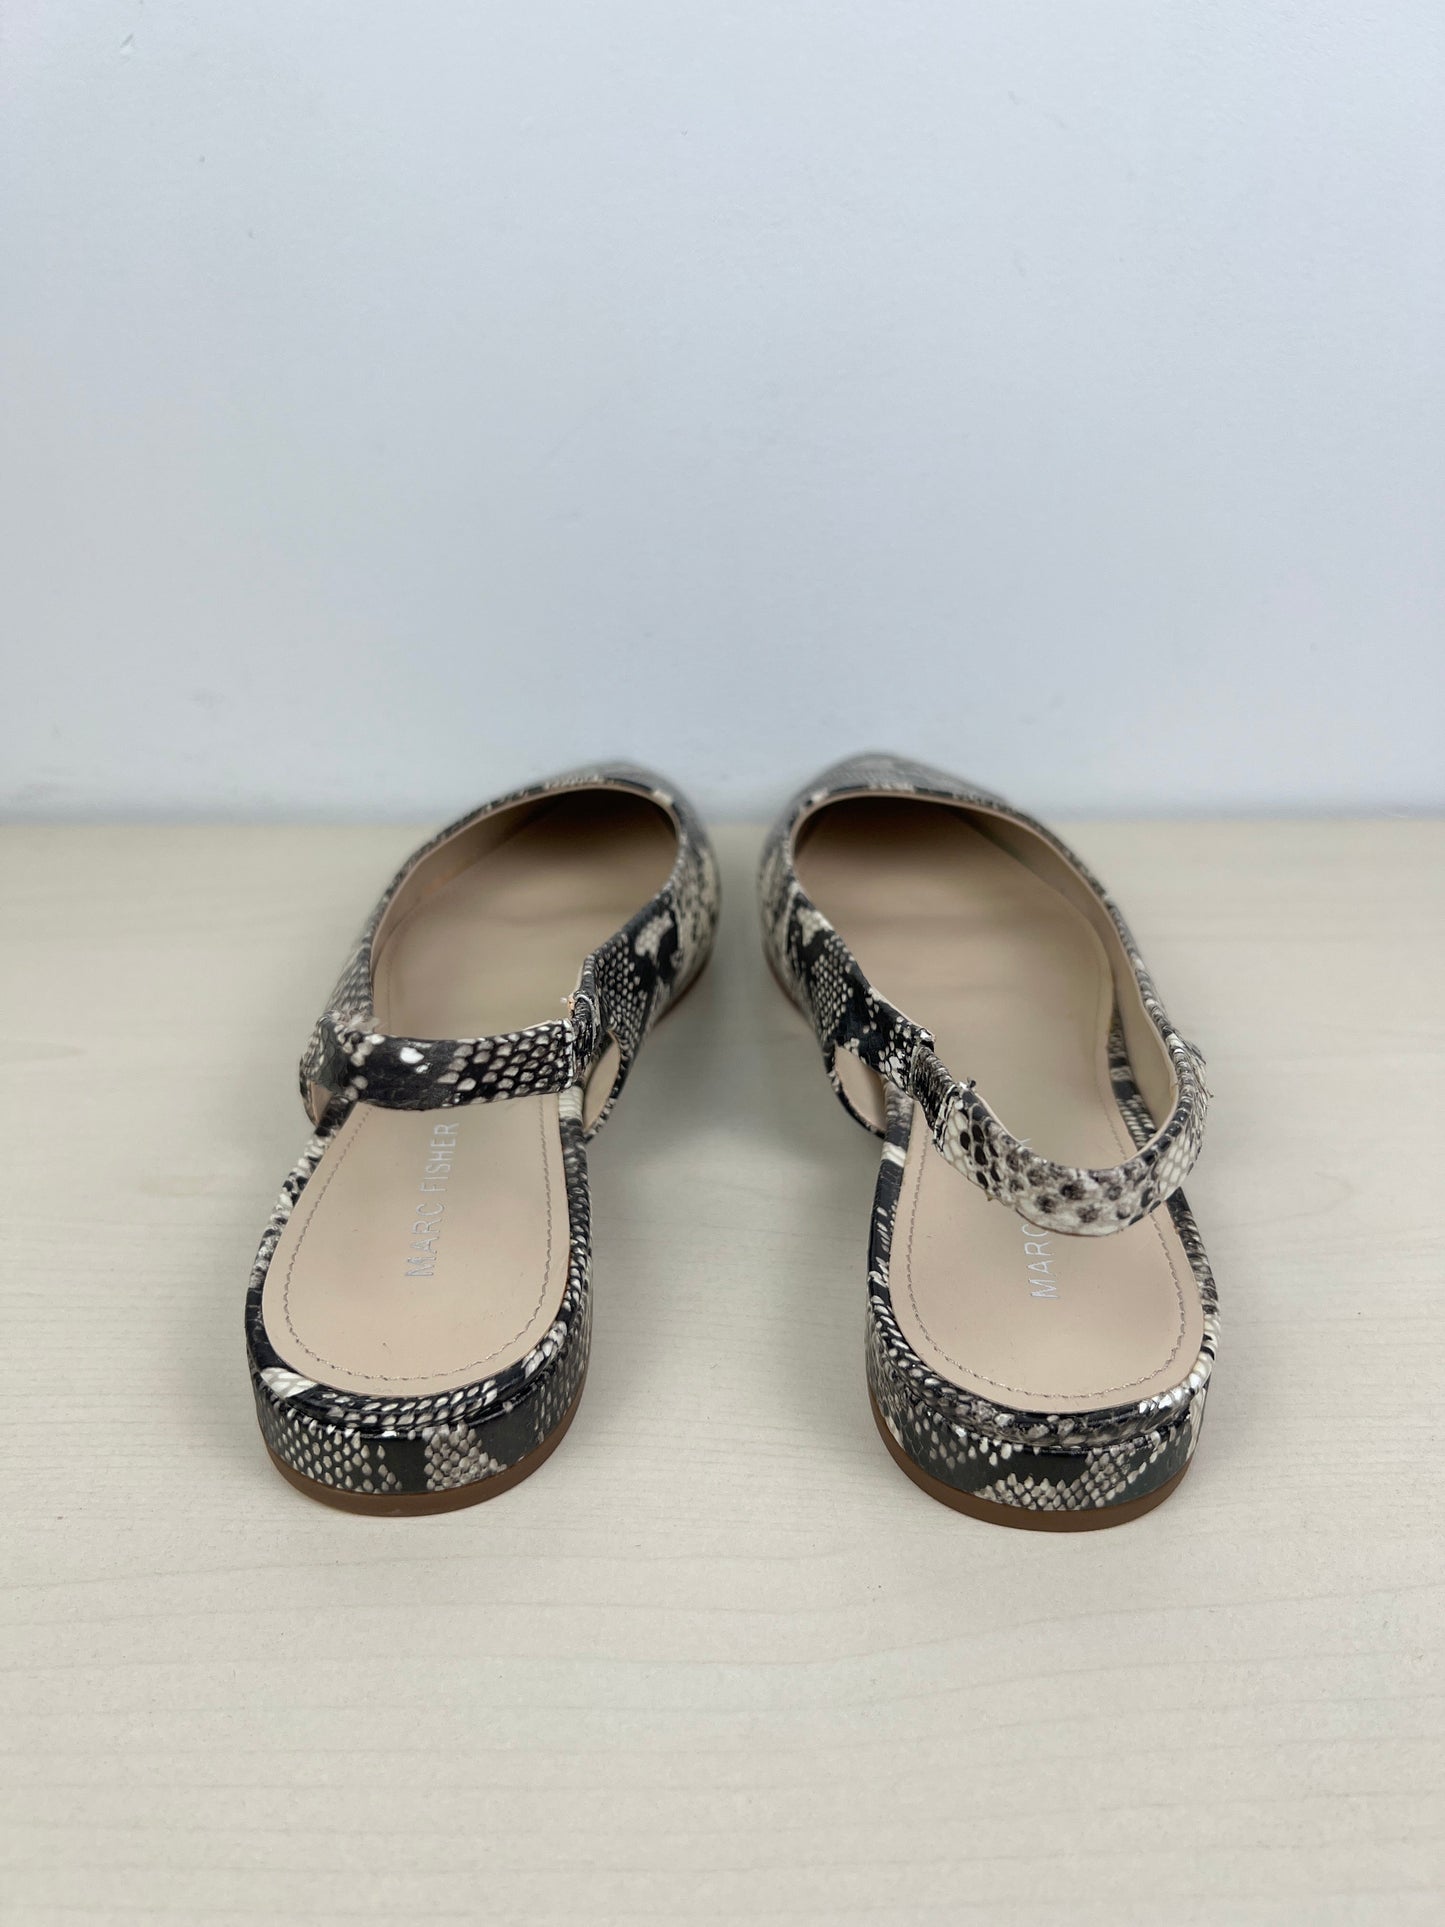 Snakeskin Print Shoes Flats Marc Fisher, Size 9.5